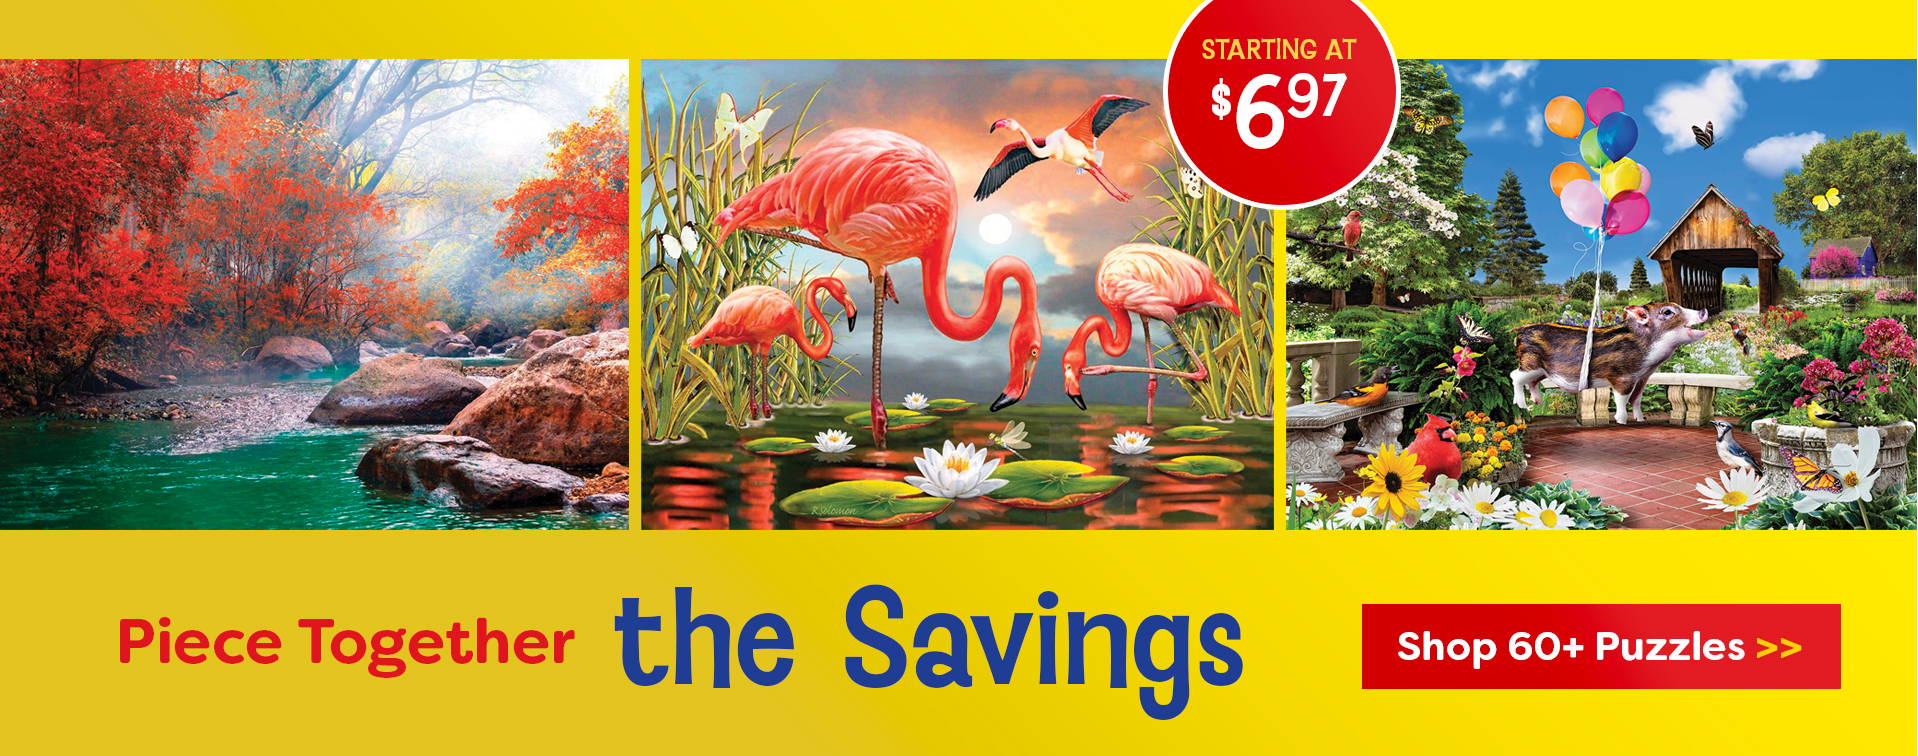 Piece together the Savings on 60+ puzzles. Image: Puzzles featured in sale.